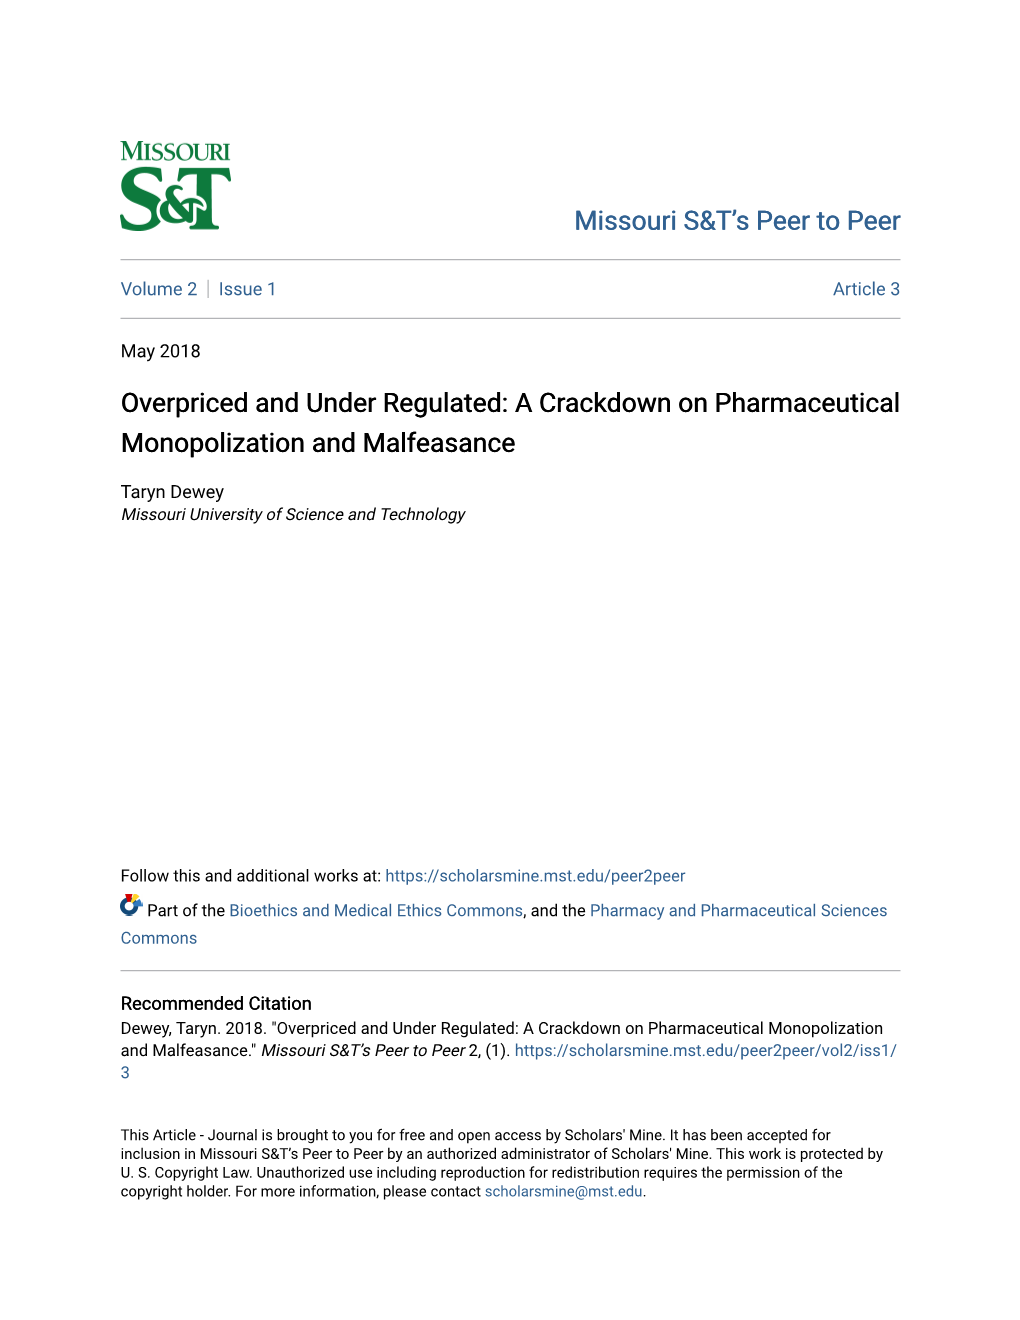 Overpriced and Under Regulated: a Crackdown on Pharmaceutical Monopolization and Malfeasance